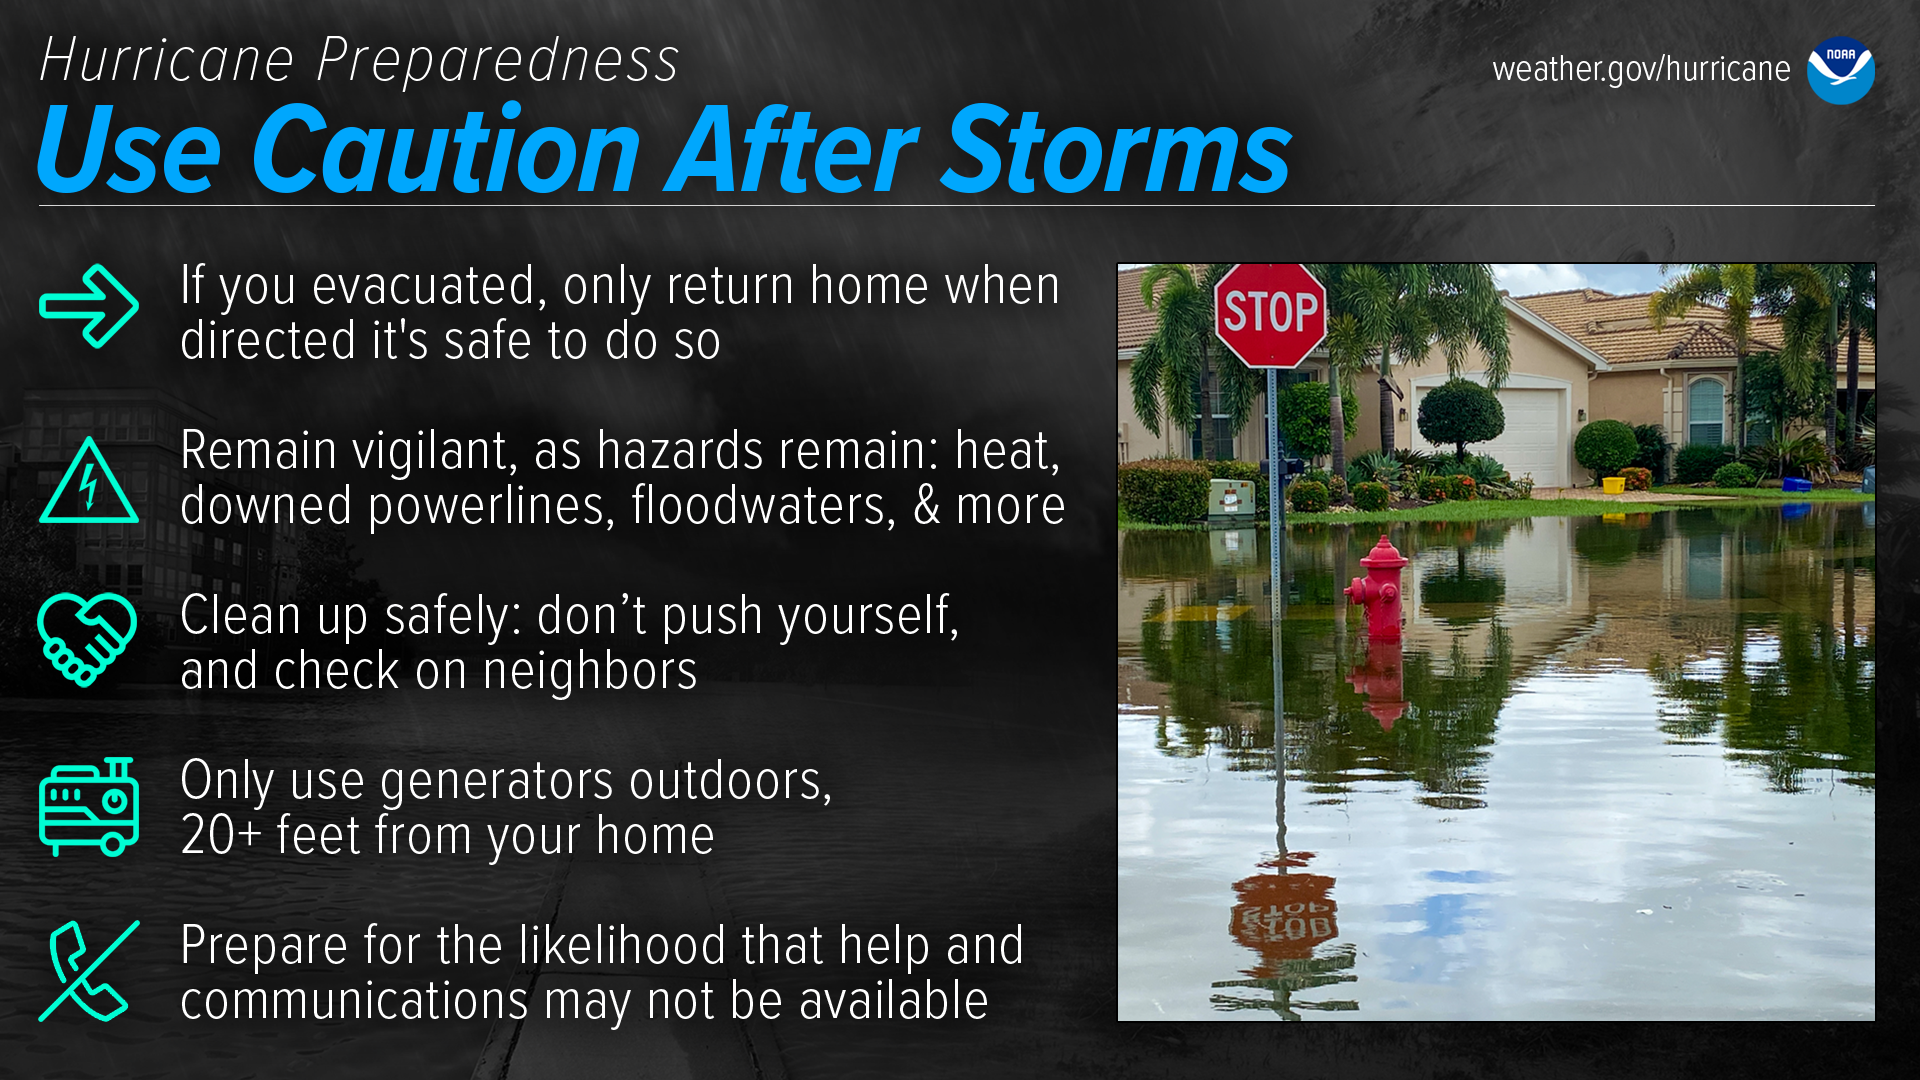 Hurricane Preparedness - Use Caution After Storms. If you evacuated, only return home when directed that it's safe to do so. Remain vigilant, as hazards remain: heat, downed power lines, floodwaters, and more. Clean up safely: don't push yourself, and check on neighbors. Only use generators outdoors, 20+ feet from your home. Prepare for the likelihood that help and communications may not be available.